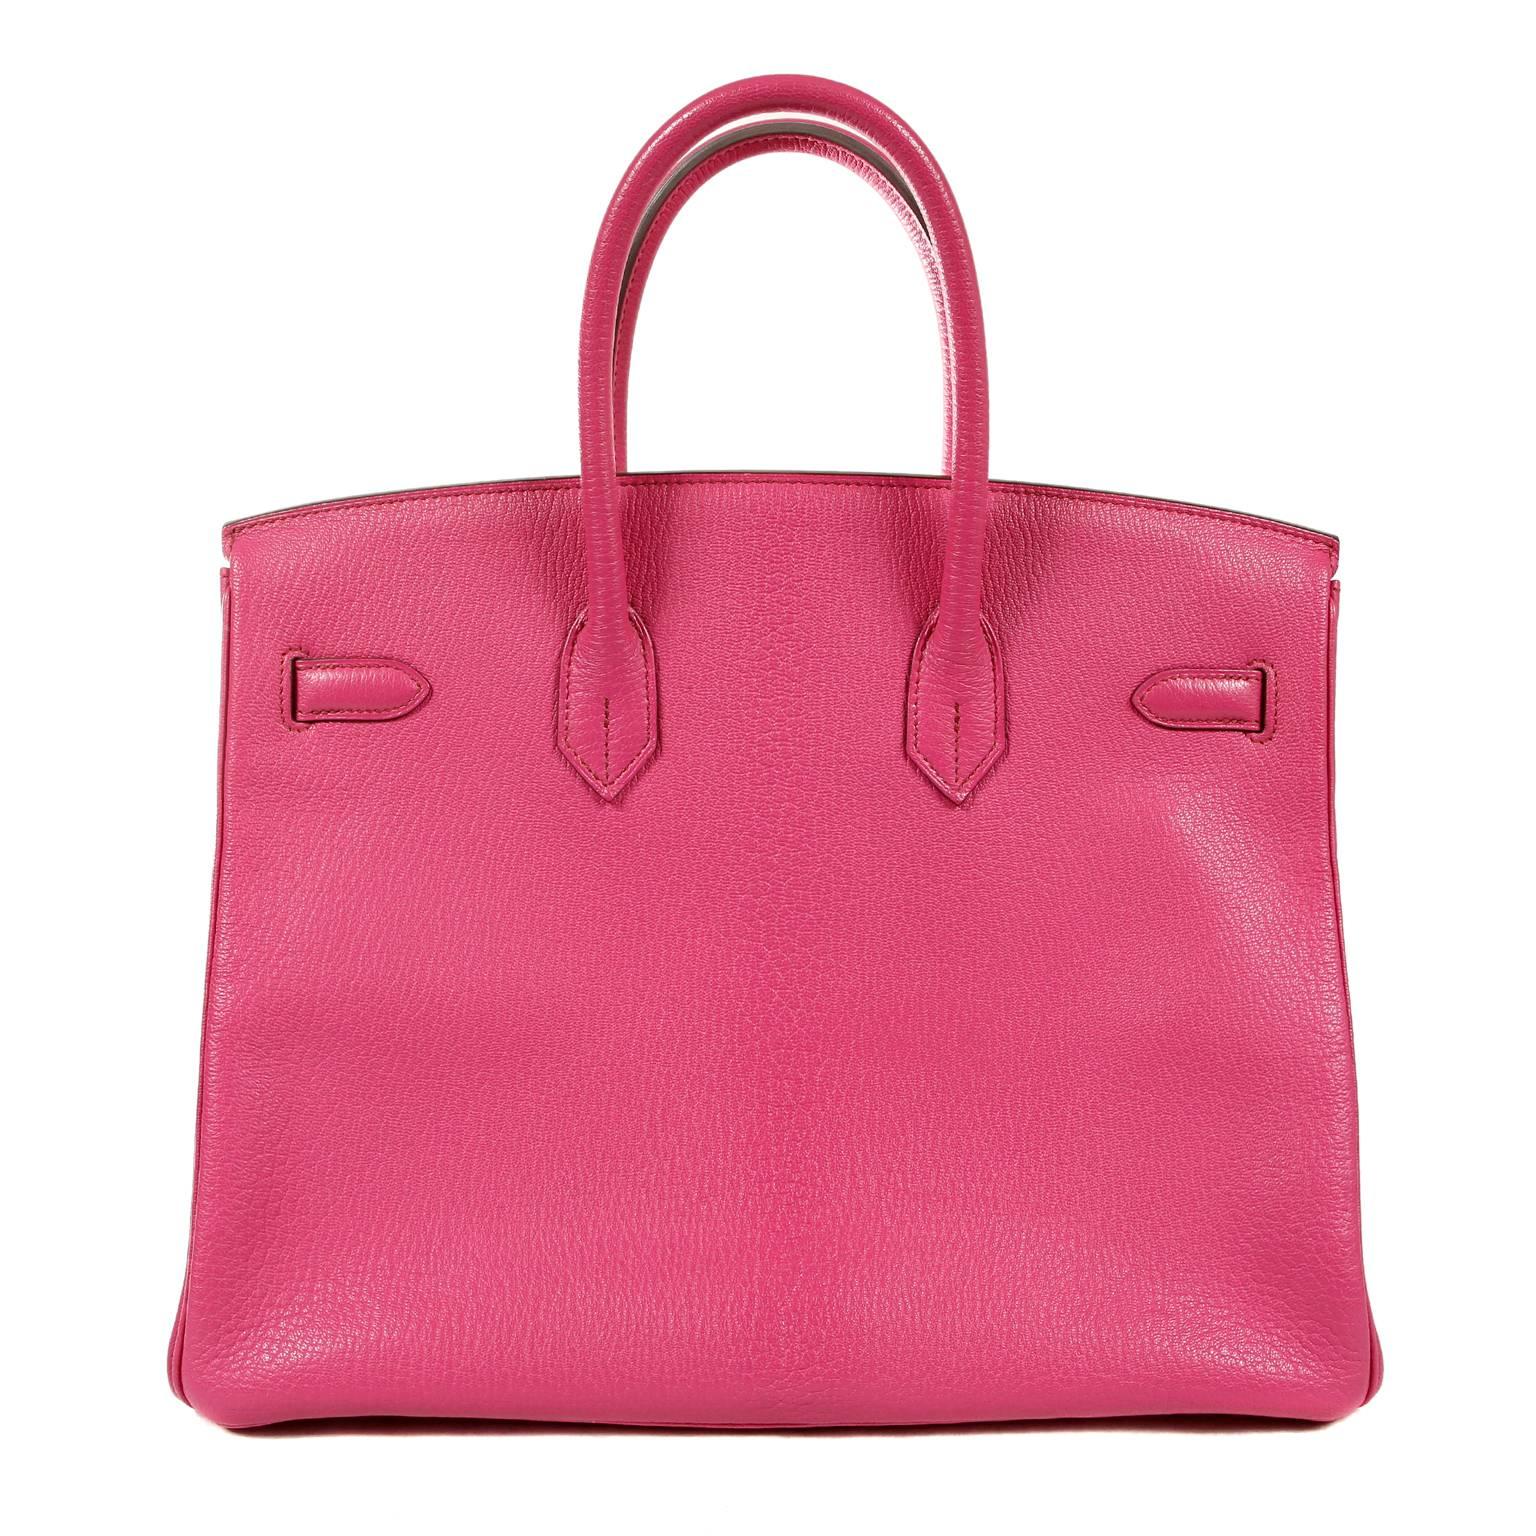 Hermès Rose Shocking Chevre Leather 35 cm Birkin Bag- NEW; Never Carried
  Hermès bags are considered the ultimate luxury item worldwide.  Each piece is handcrafted with waitlists that can exceed a year or more.  Rose Shocking is vibrant and